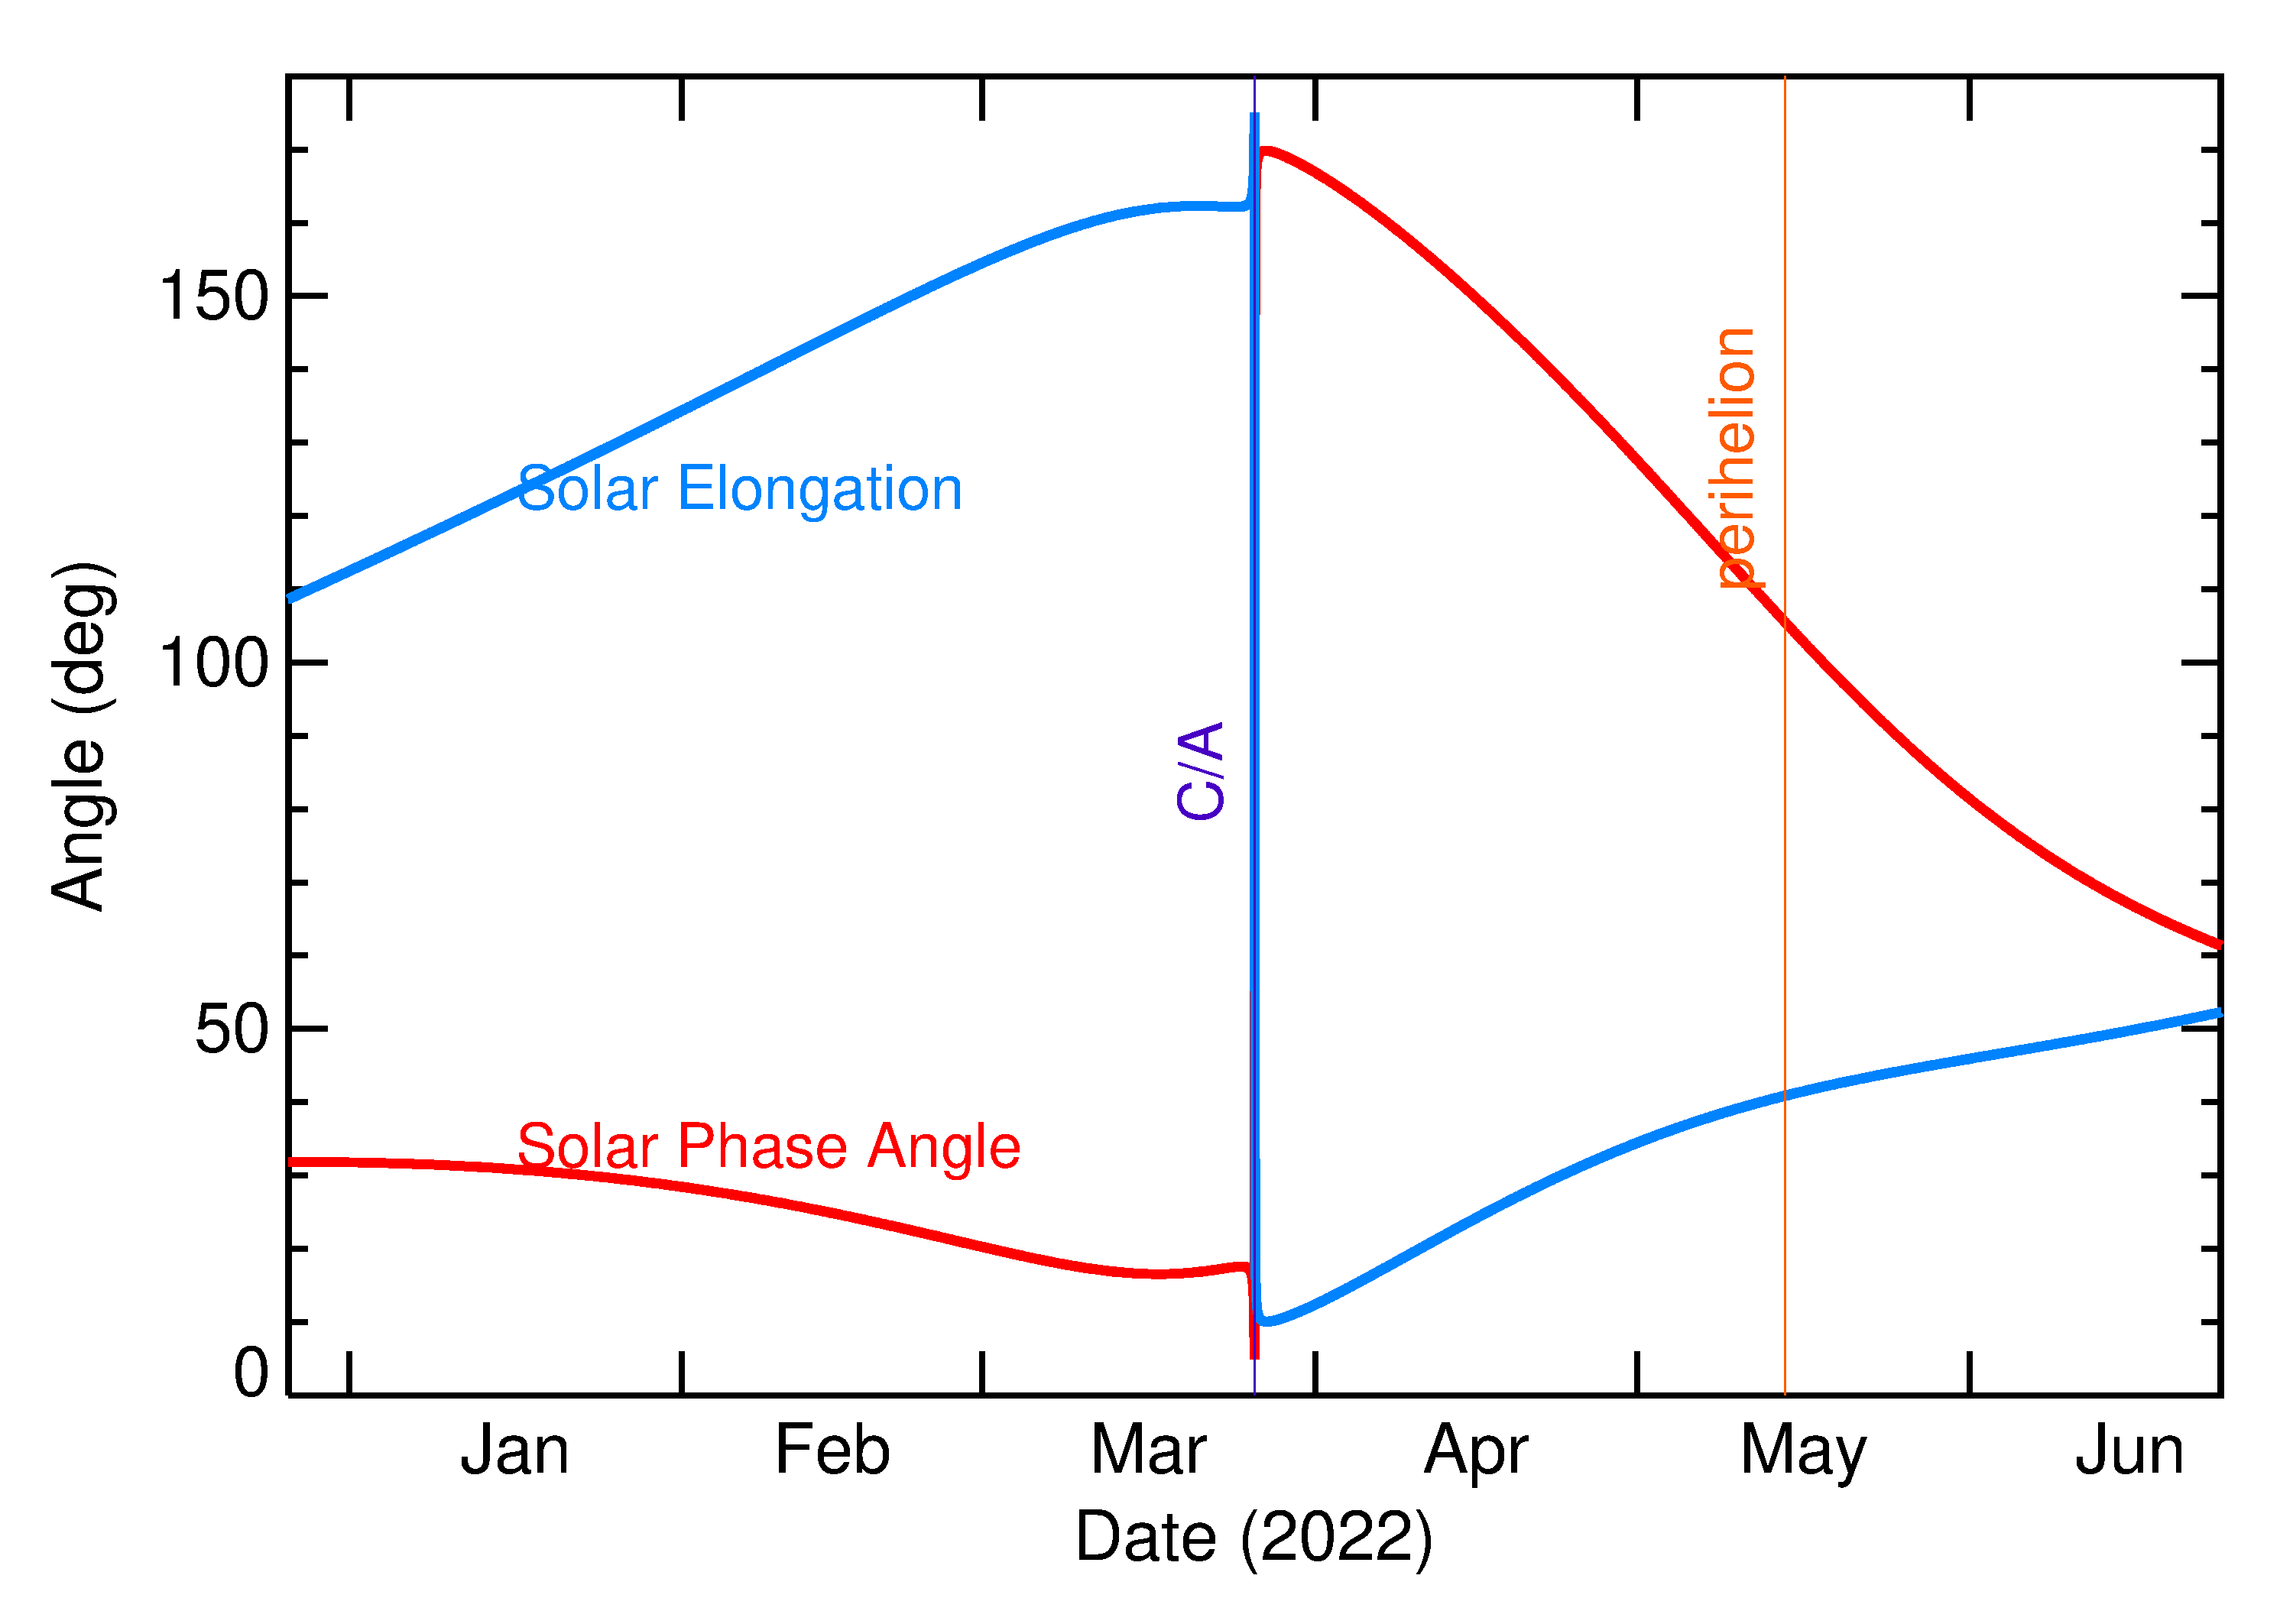 Solar Elongation and Solar Phase Angle of 2022 FD1 in the months around closest approach